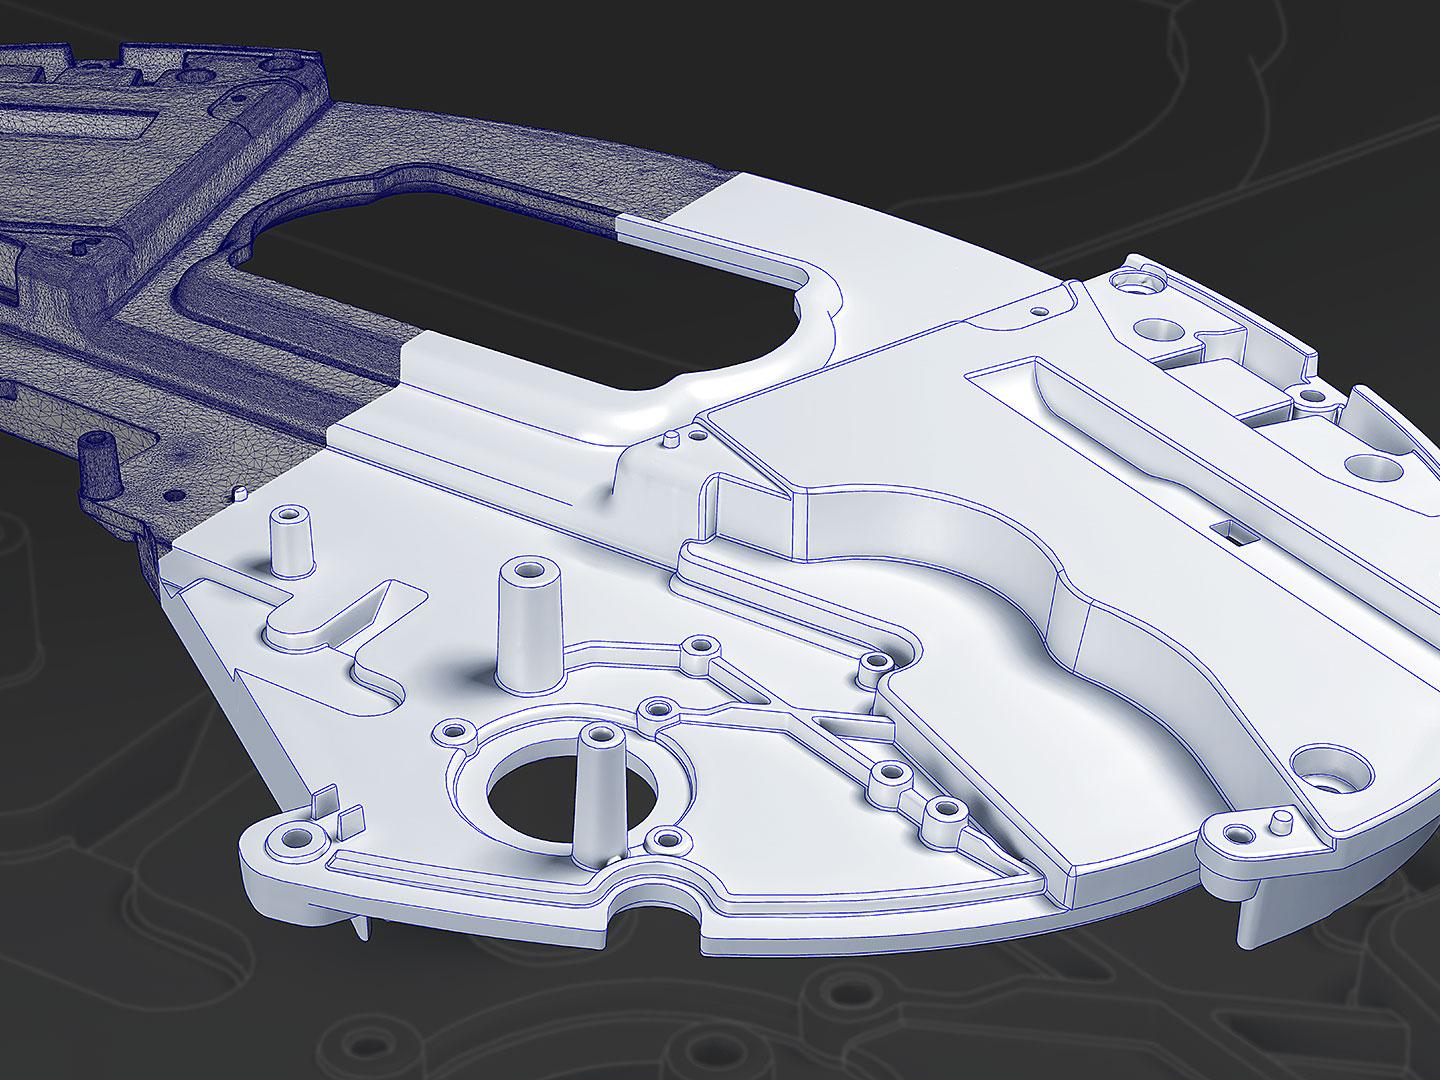 Create CAD models of prototypes